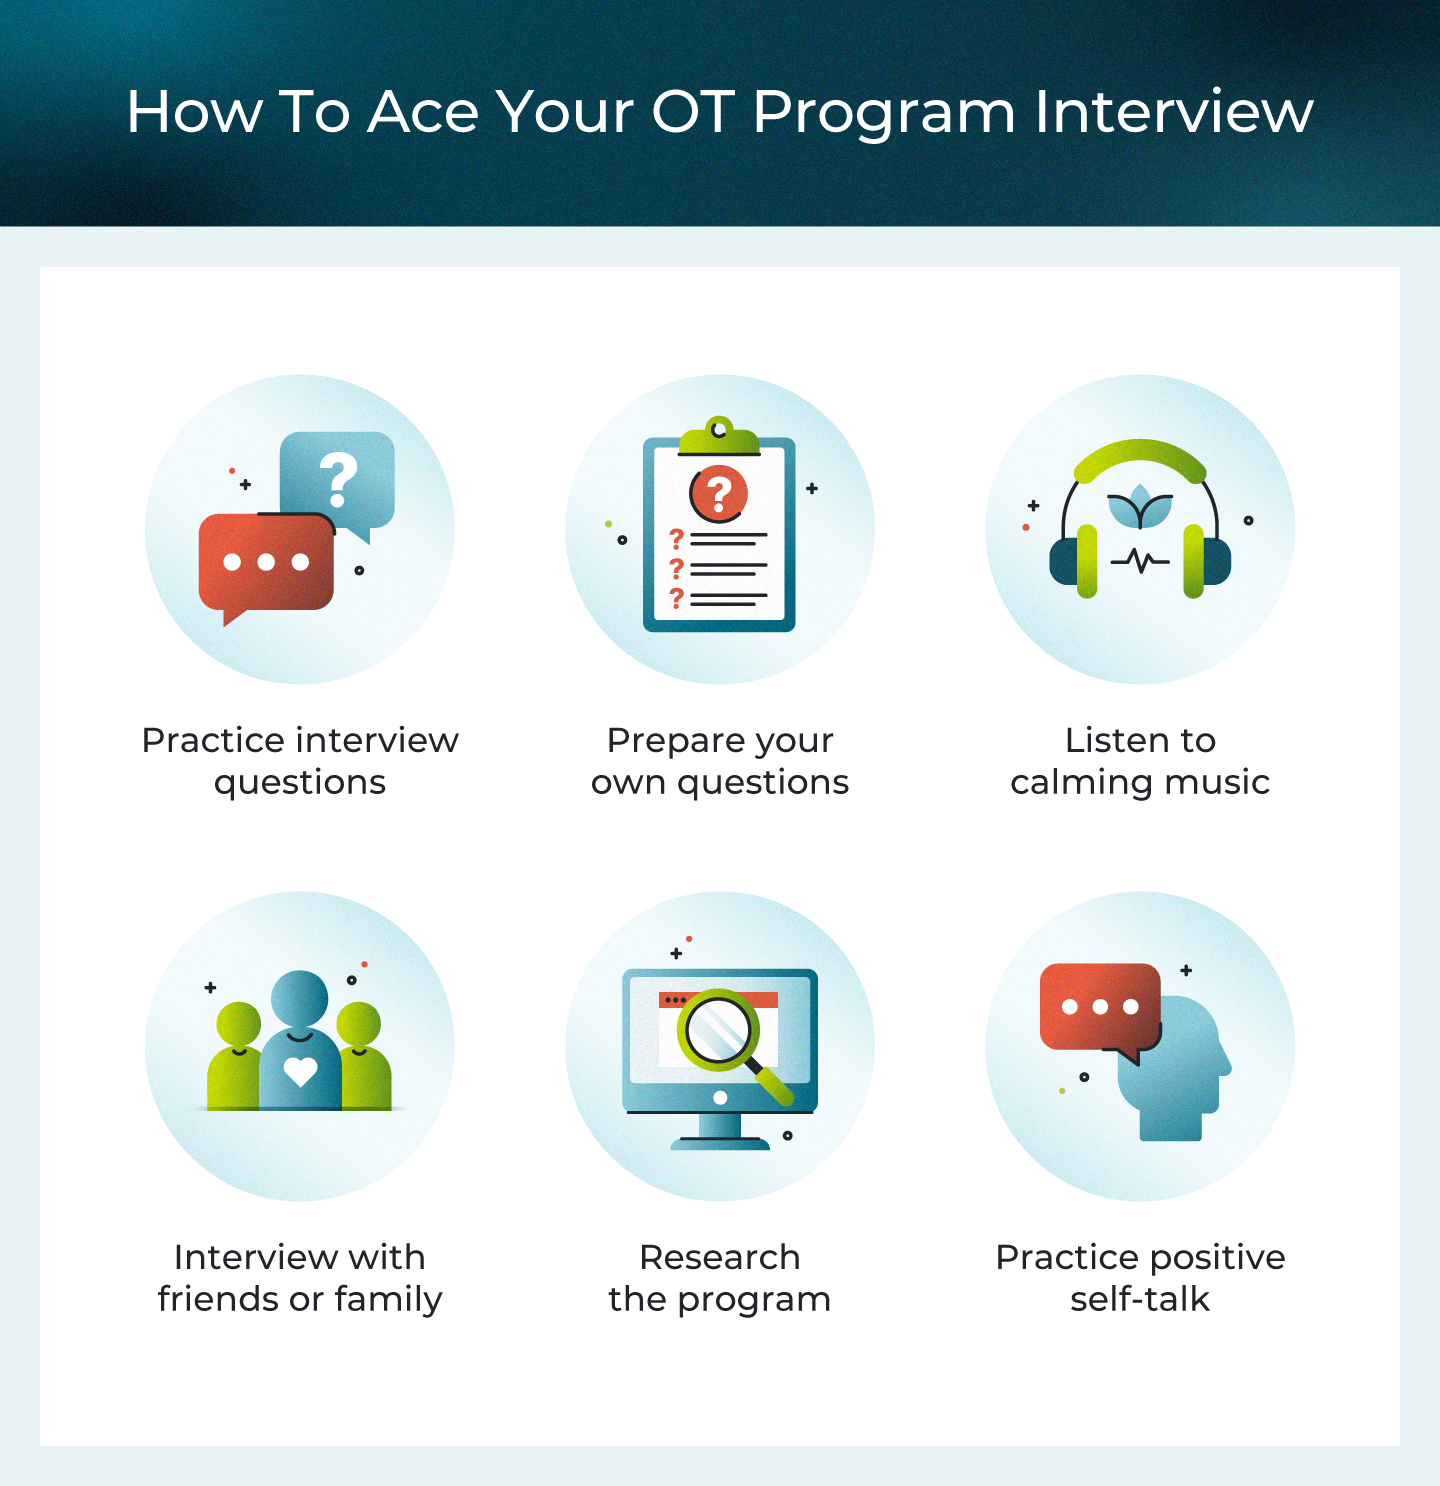 how to ace your ot program intreview